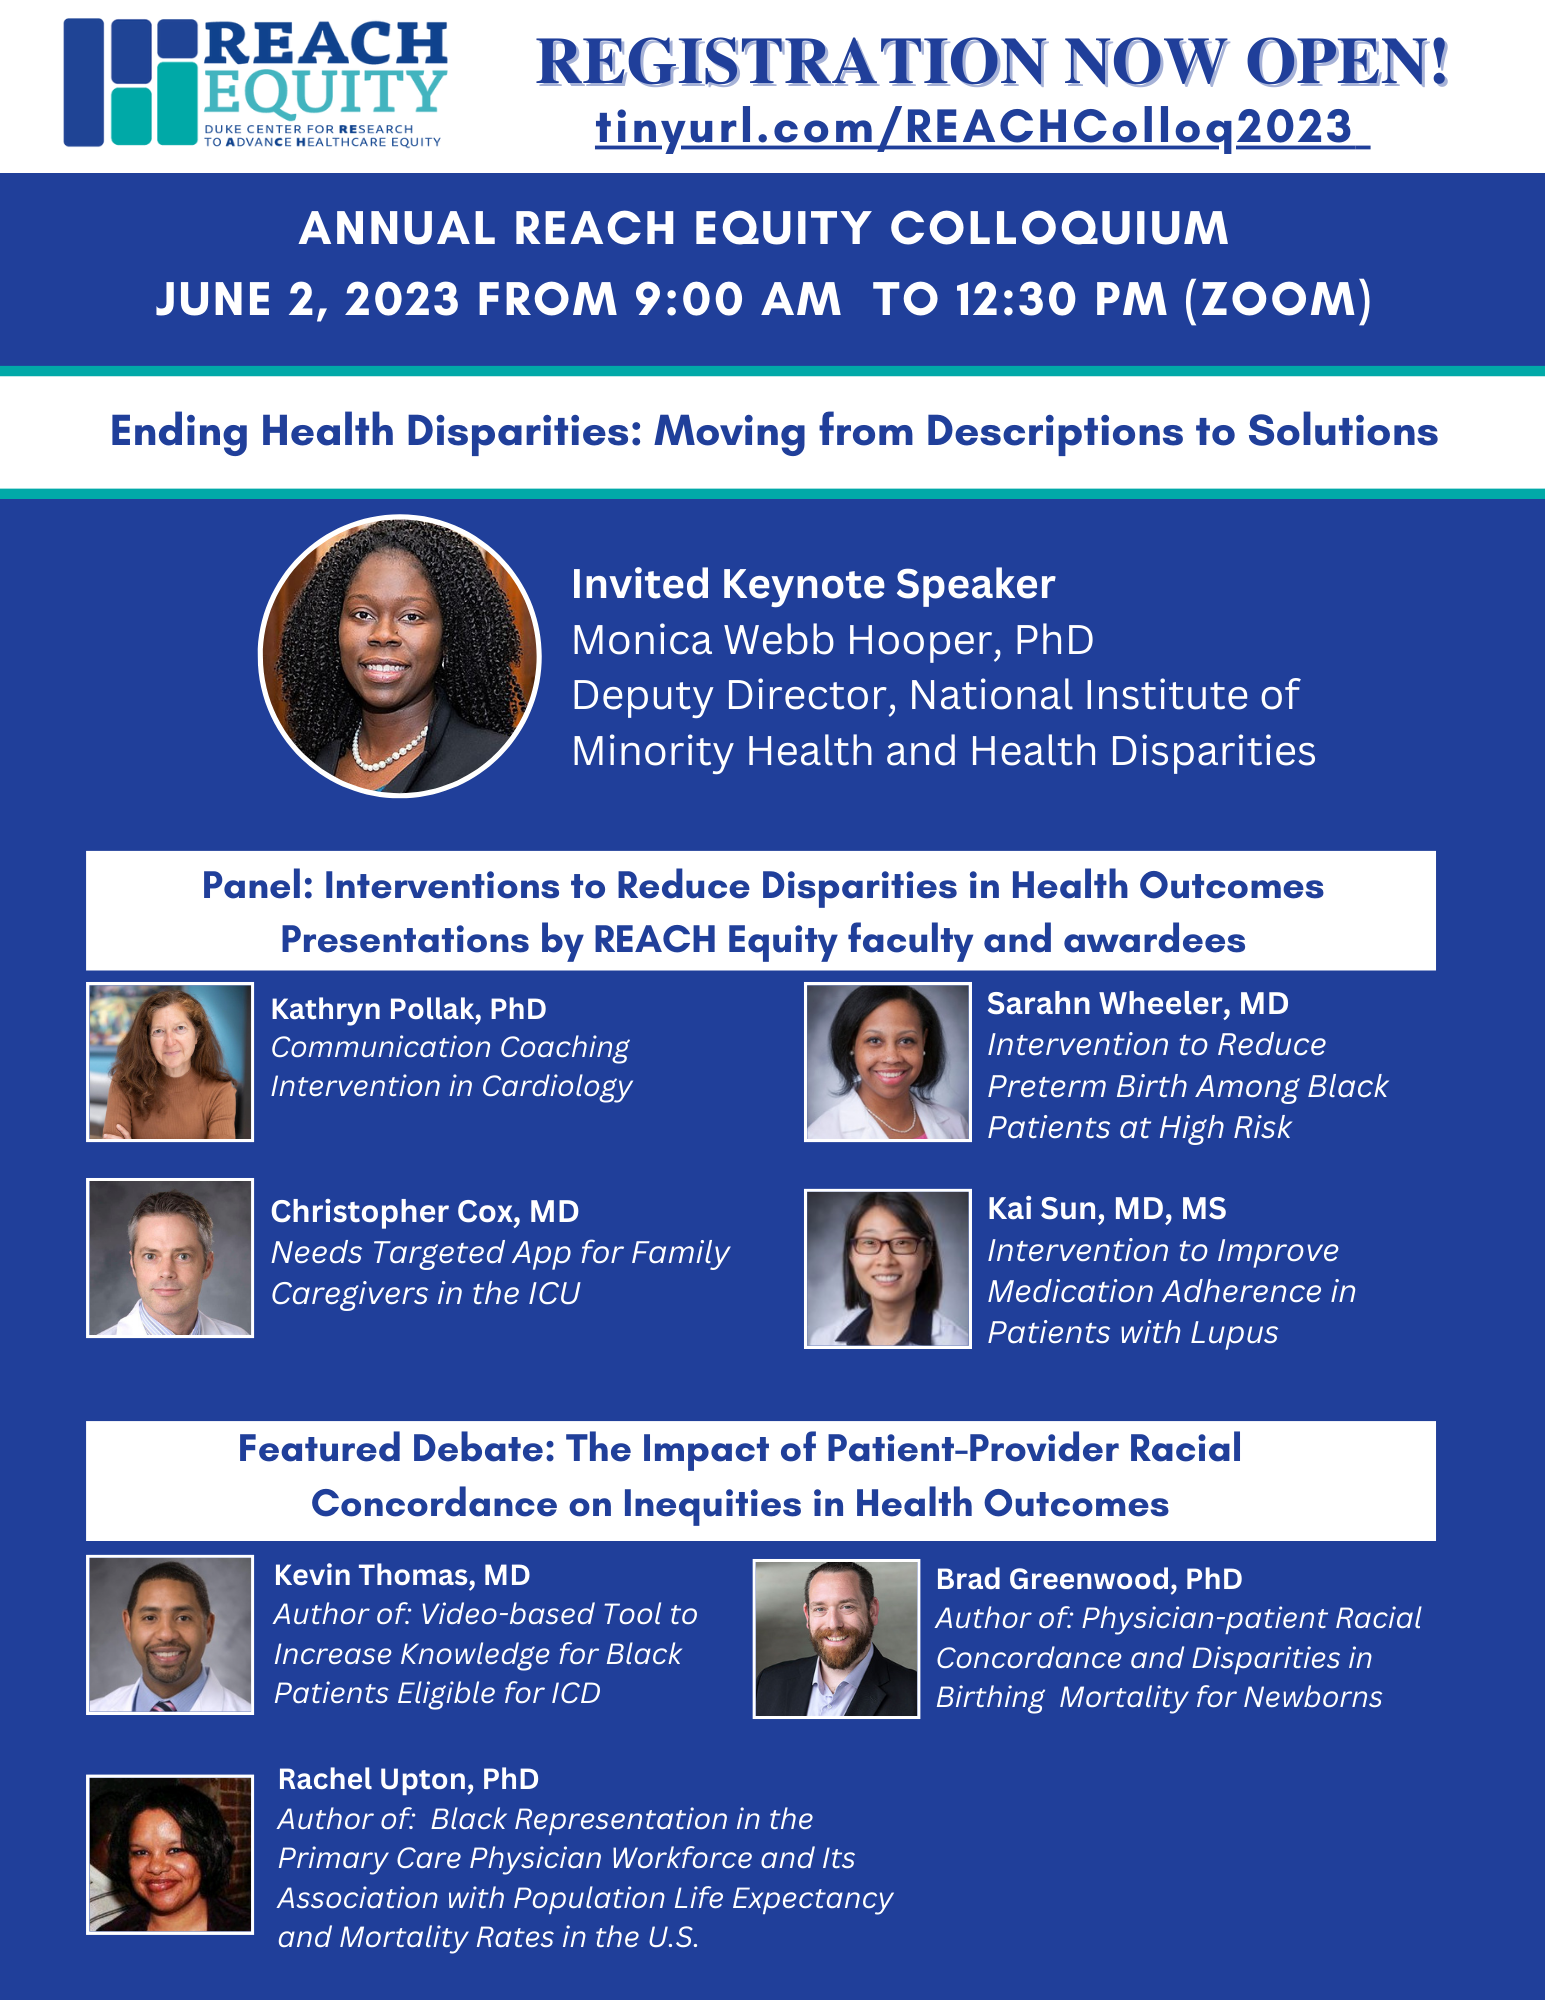 The REACH Equity Colloquium 2023 flyer. Dr. Monica Webb Hooper is the invited keynote speaker this year. There will be presentations from research faculty members in health disparities and a debate on the The Impact of Patient-Provider Racial Concordance on Inequities in Health Outcomes.